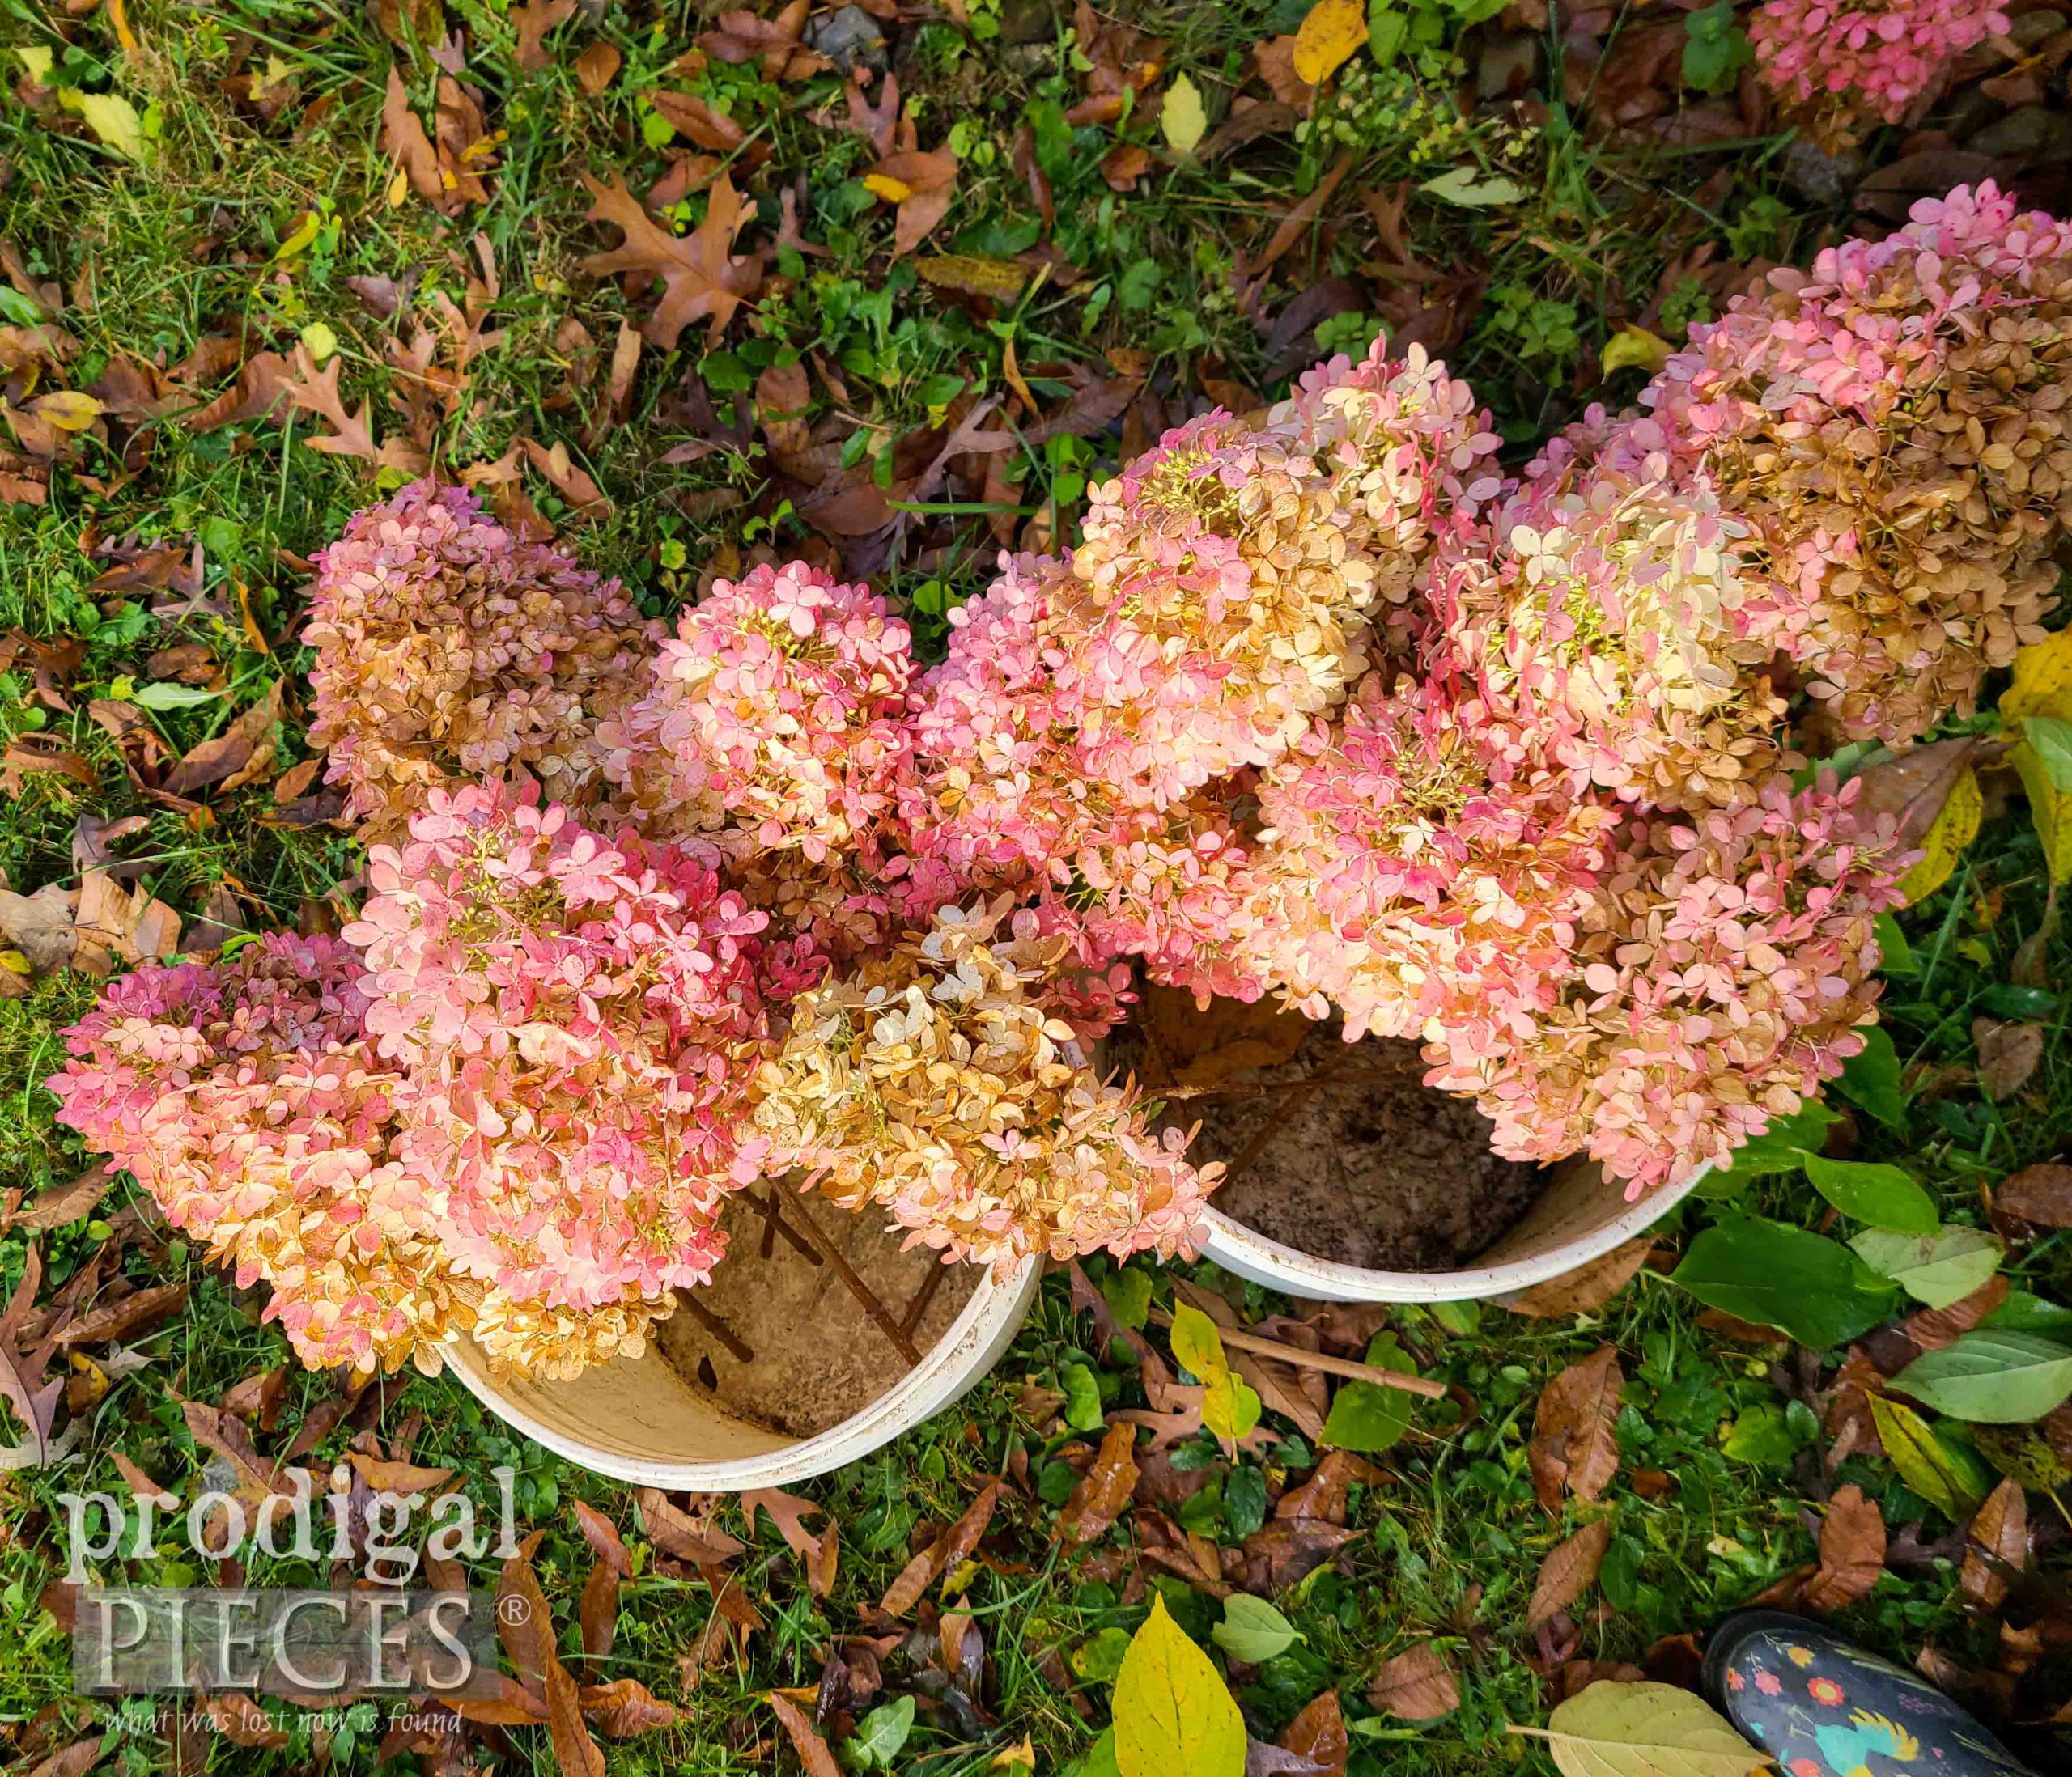 Buckets of Beautiful Limelight Hydrangeas for a DIY Wreath by Larissa of Prodigal Pieces | prodigalpieces.com #prodigalpieces